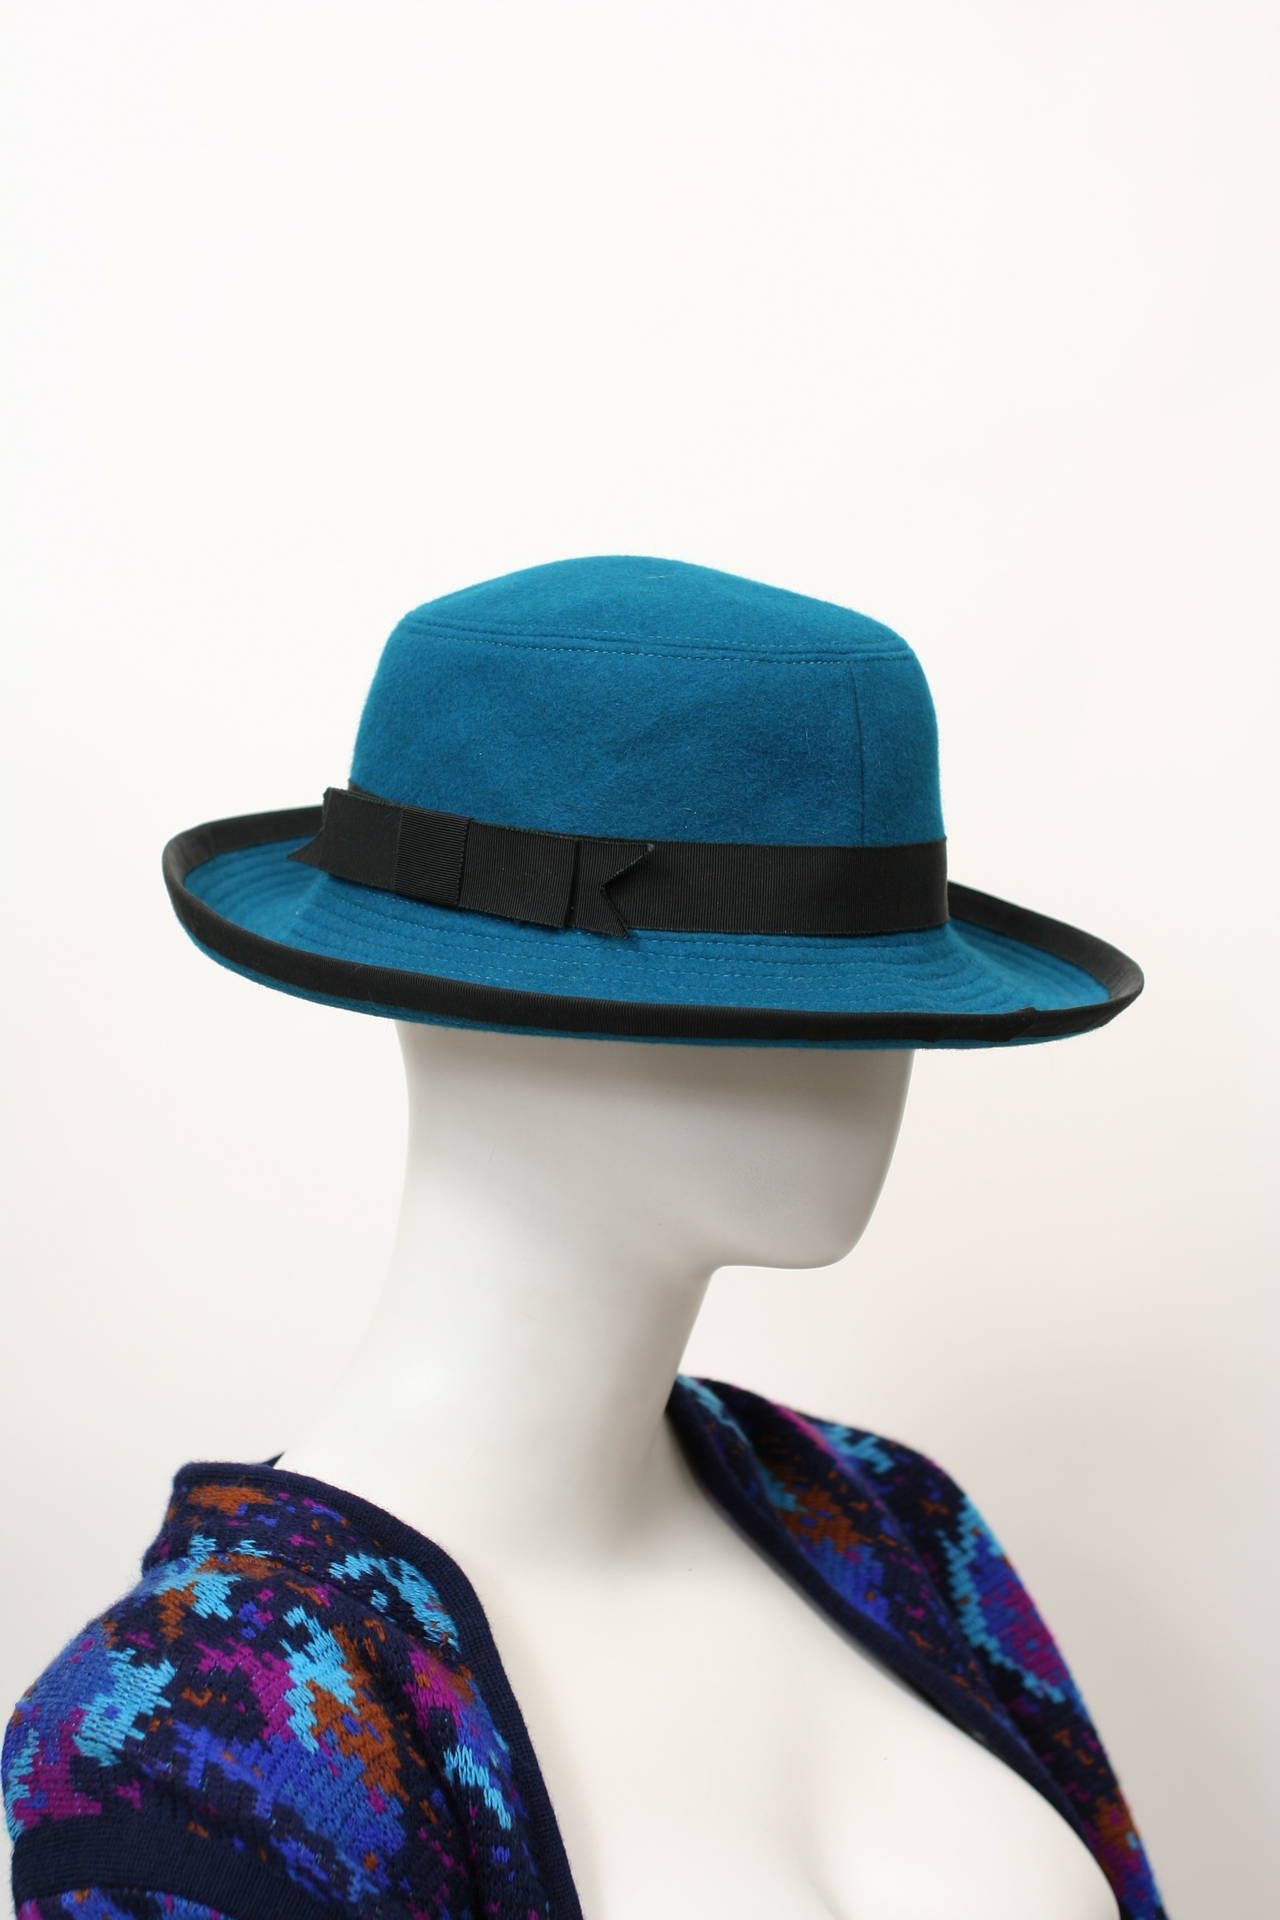 Yves Saint Laurent Teal Wool Hat YSL
Excellent Condition